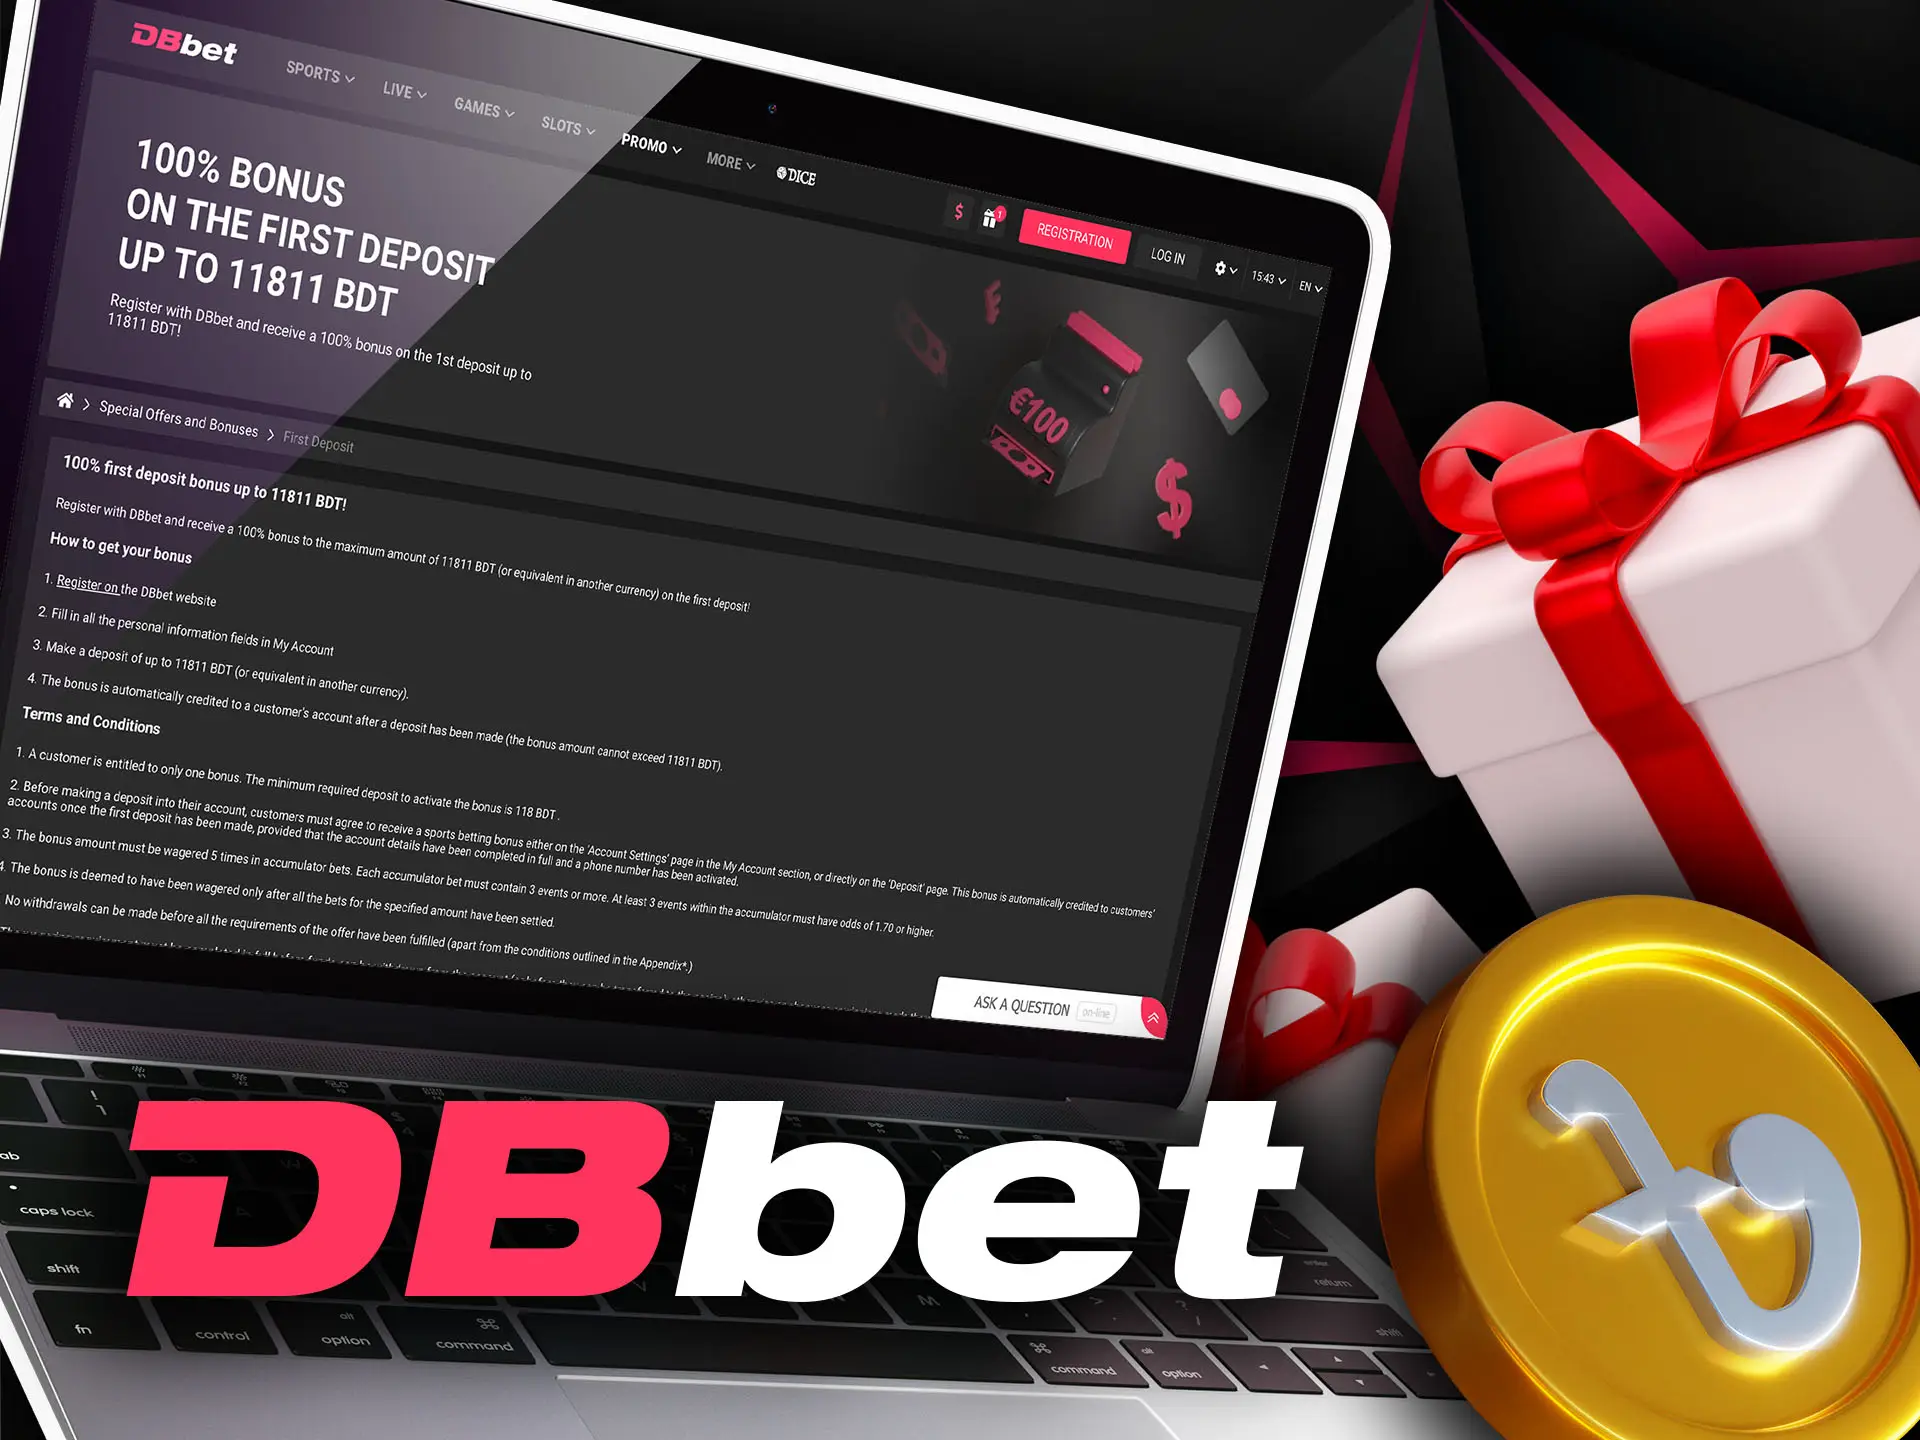 Sign up for DBbet, top up the account and get a 100% bonus on the first deposit.